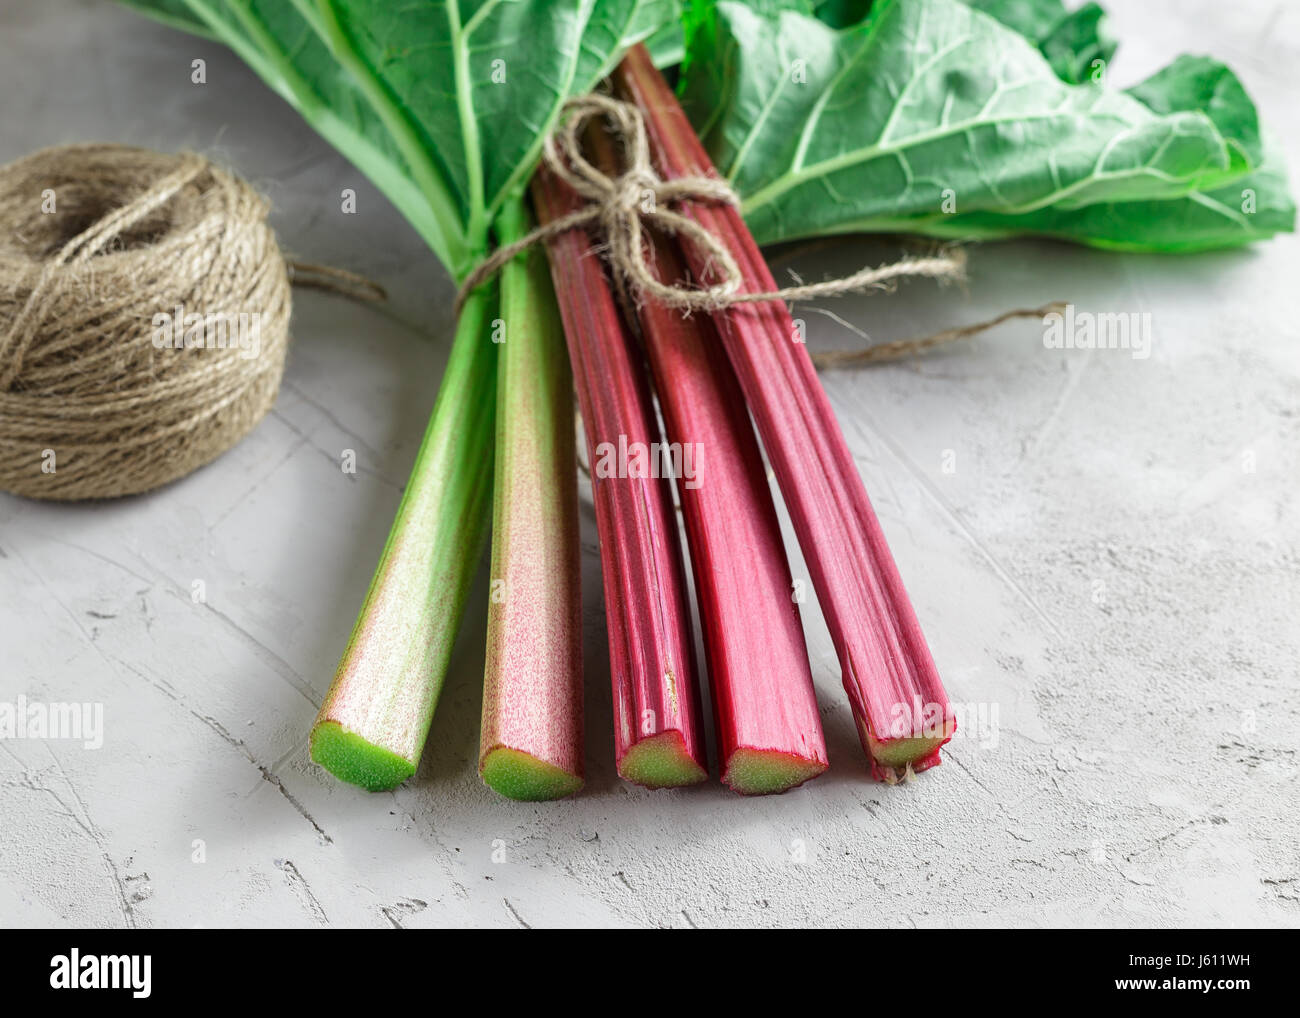 Rhubarb Leaves High Resolution Stock Photography and Images   Alamy